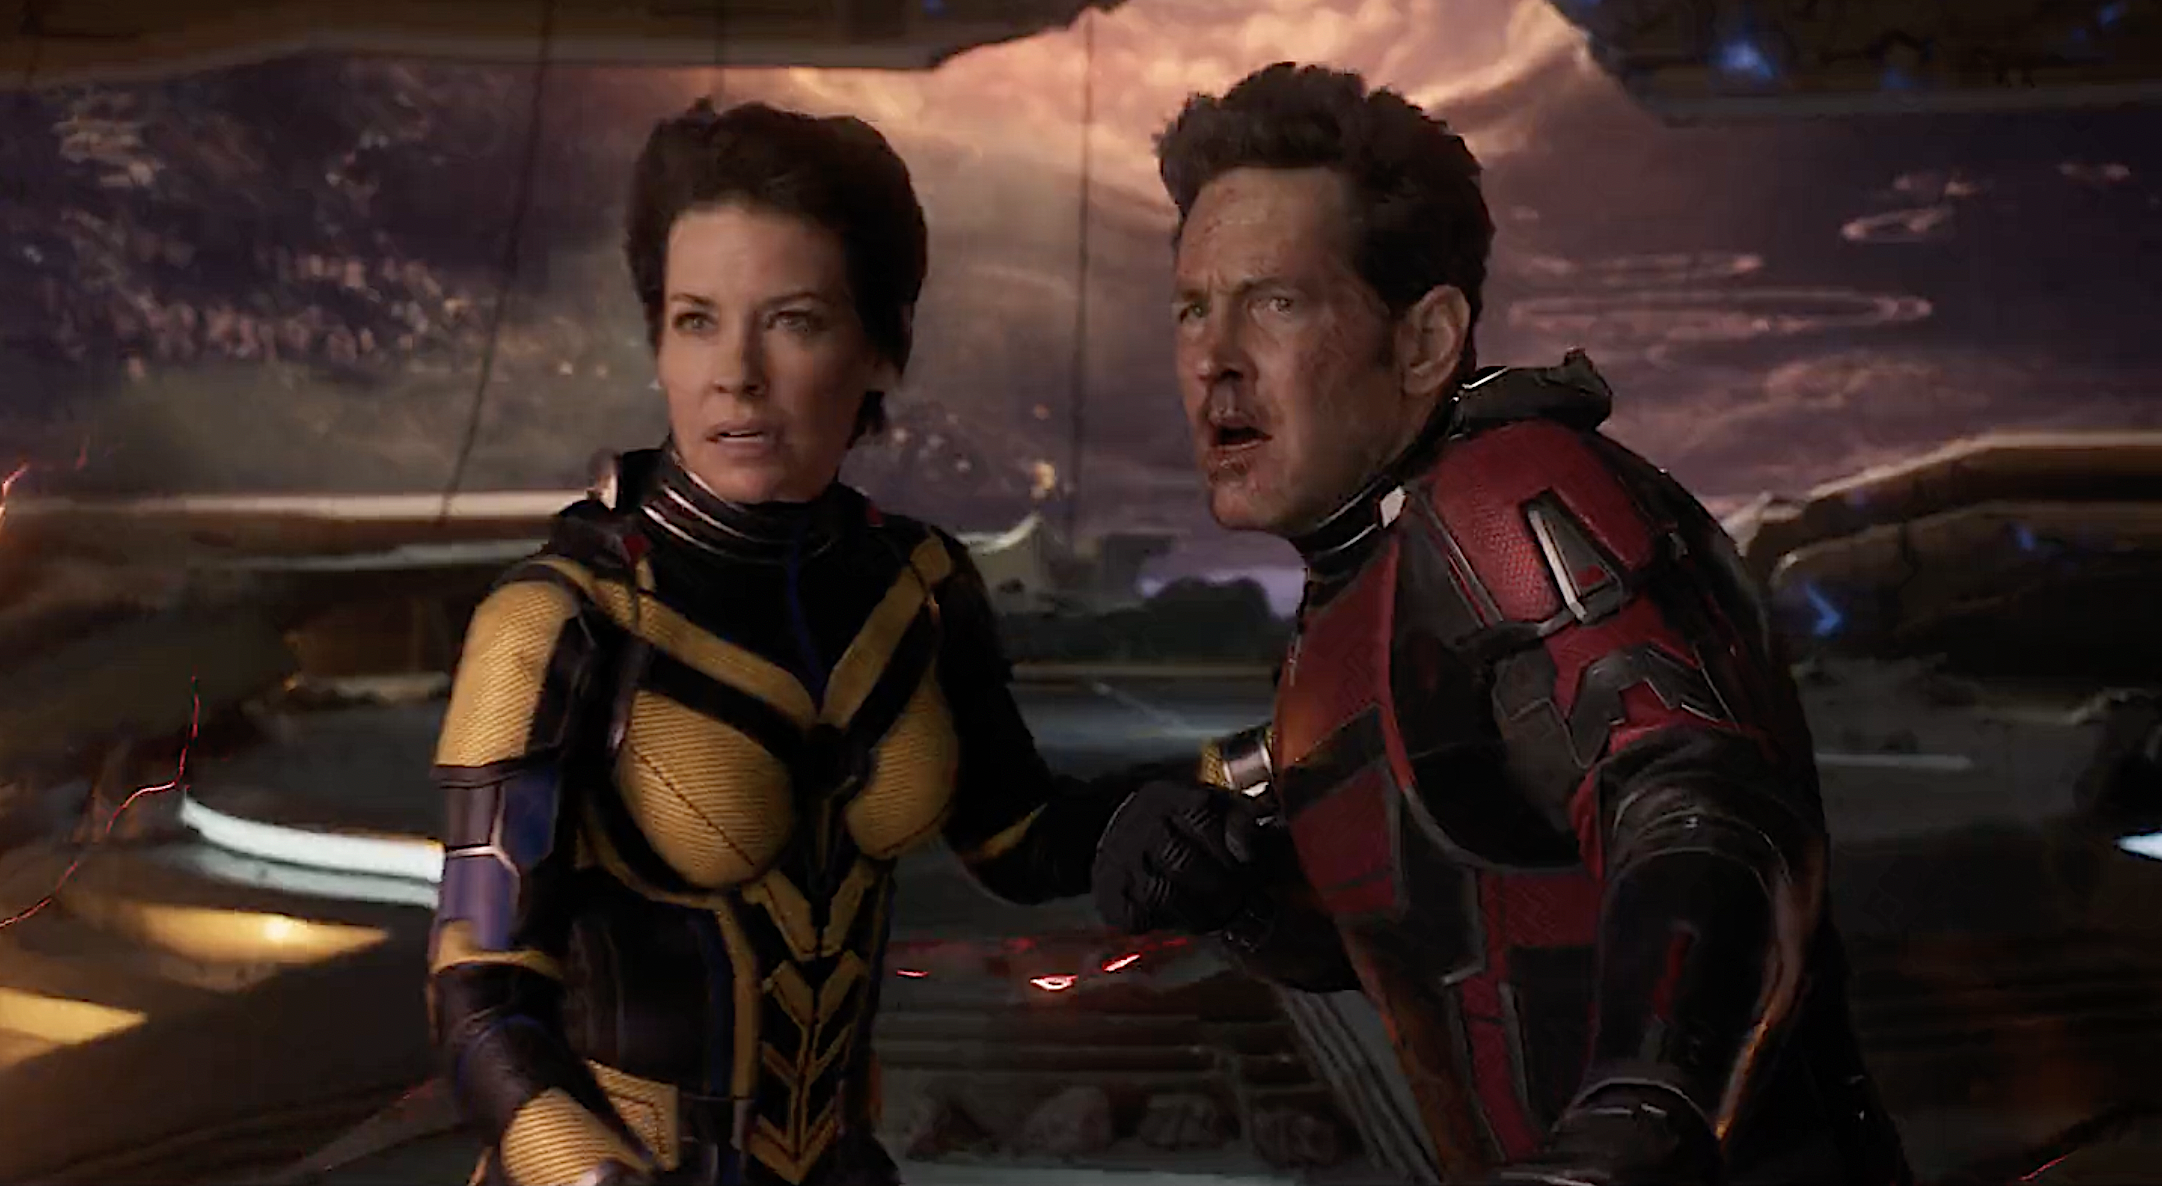 Ant-Man and the Wasp: Quantumania' Digital Release Is Hijacked by  Disgruntled Disney Plus Users